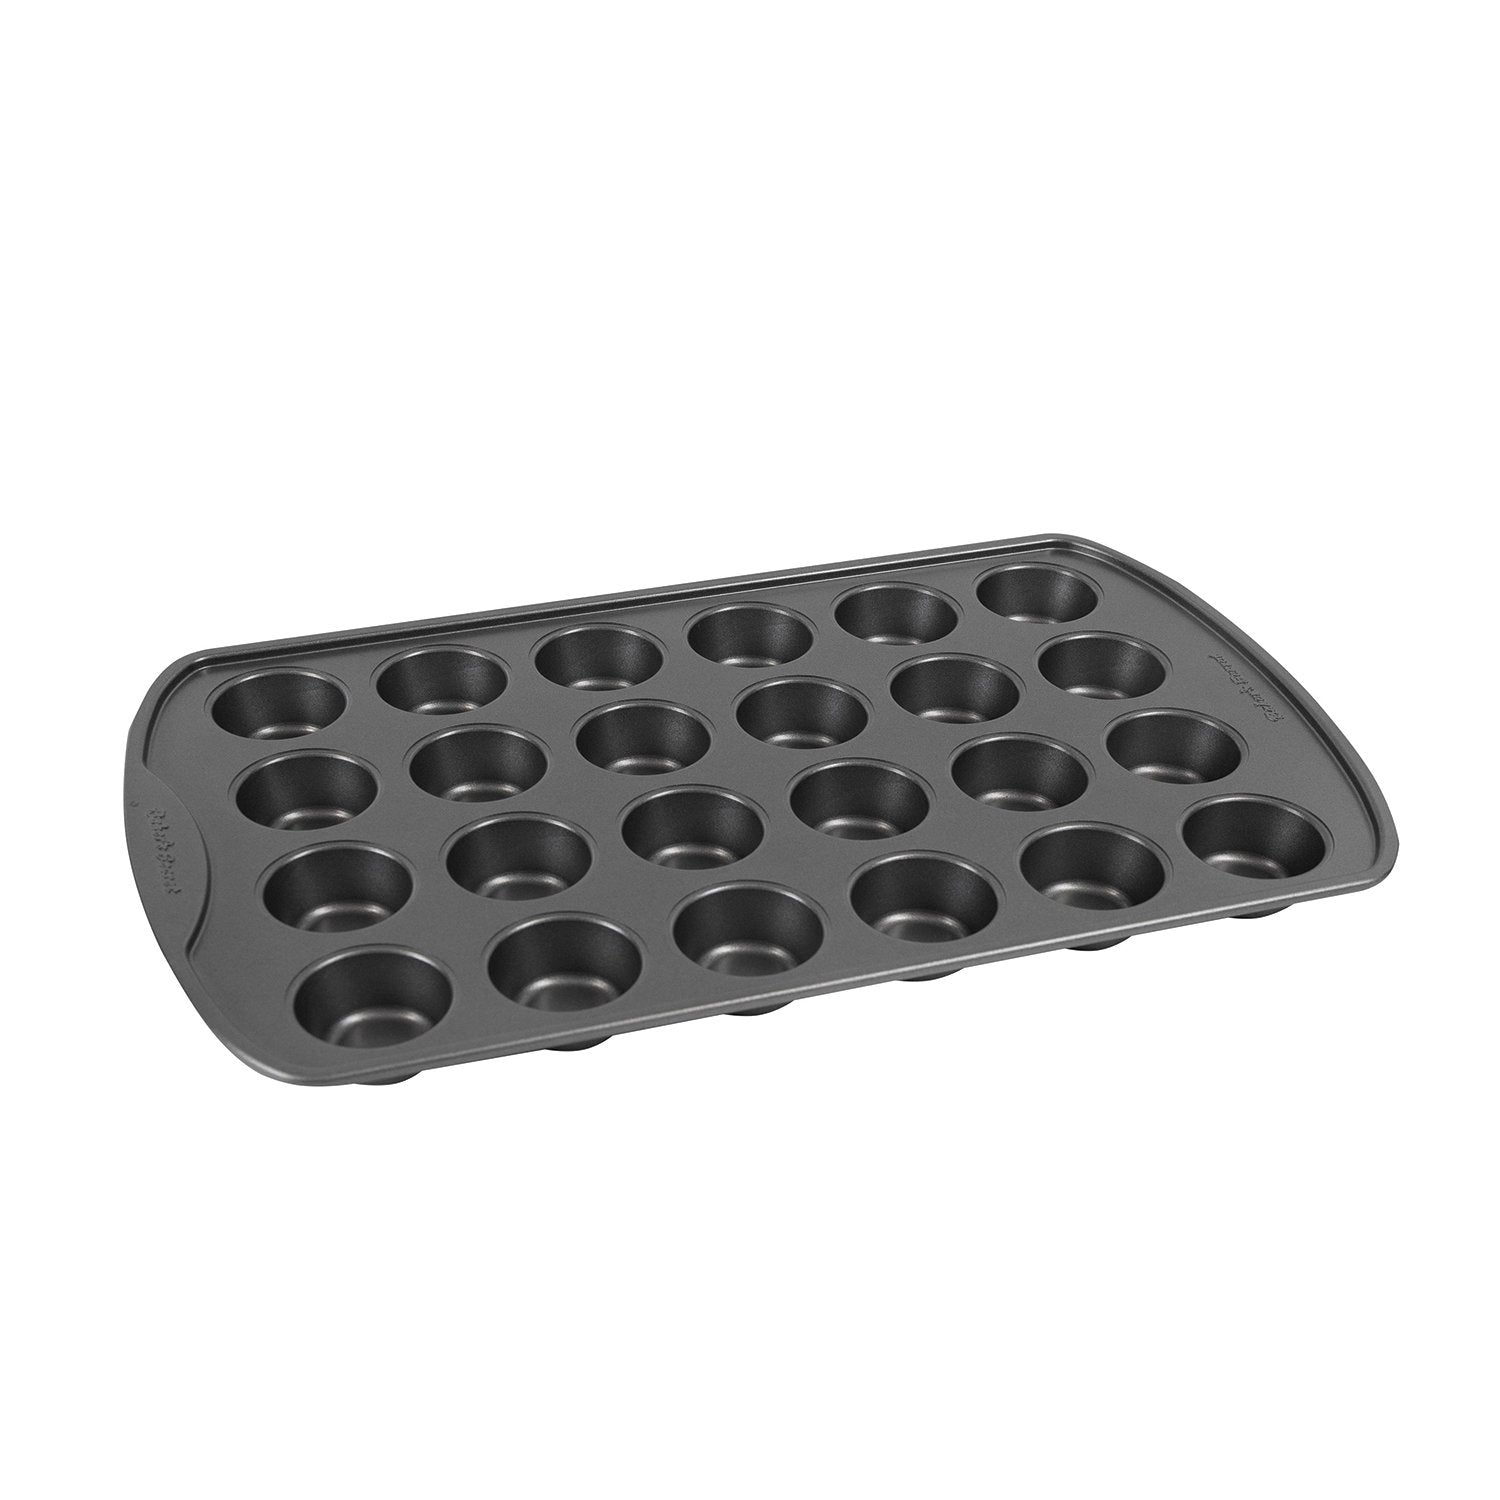 24 Cups Muffin Pan  Muffin & Pastry Pans - Baker's Secret